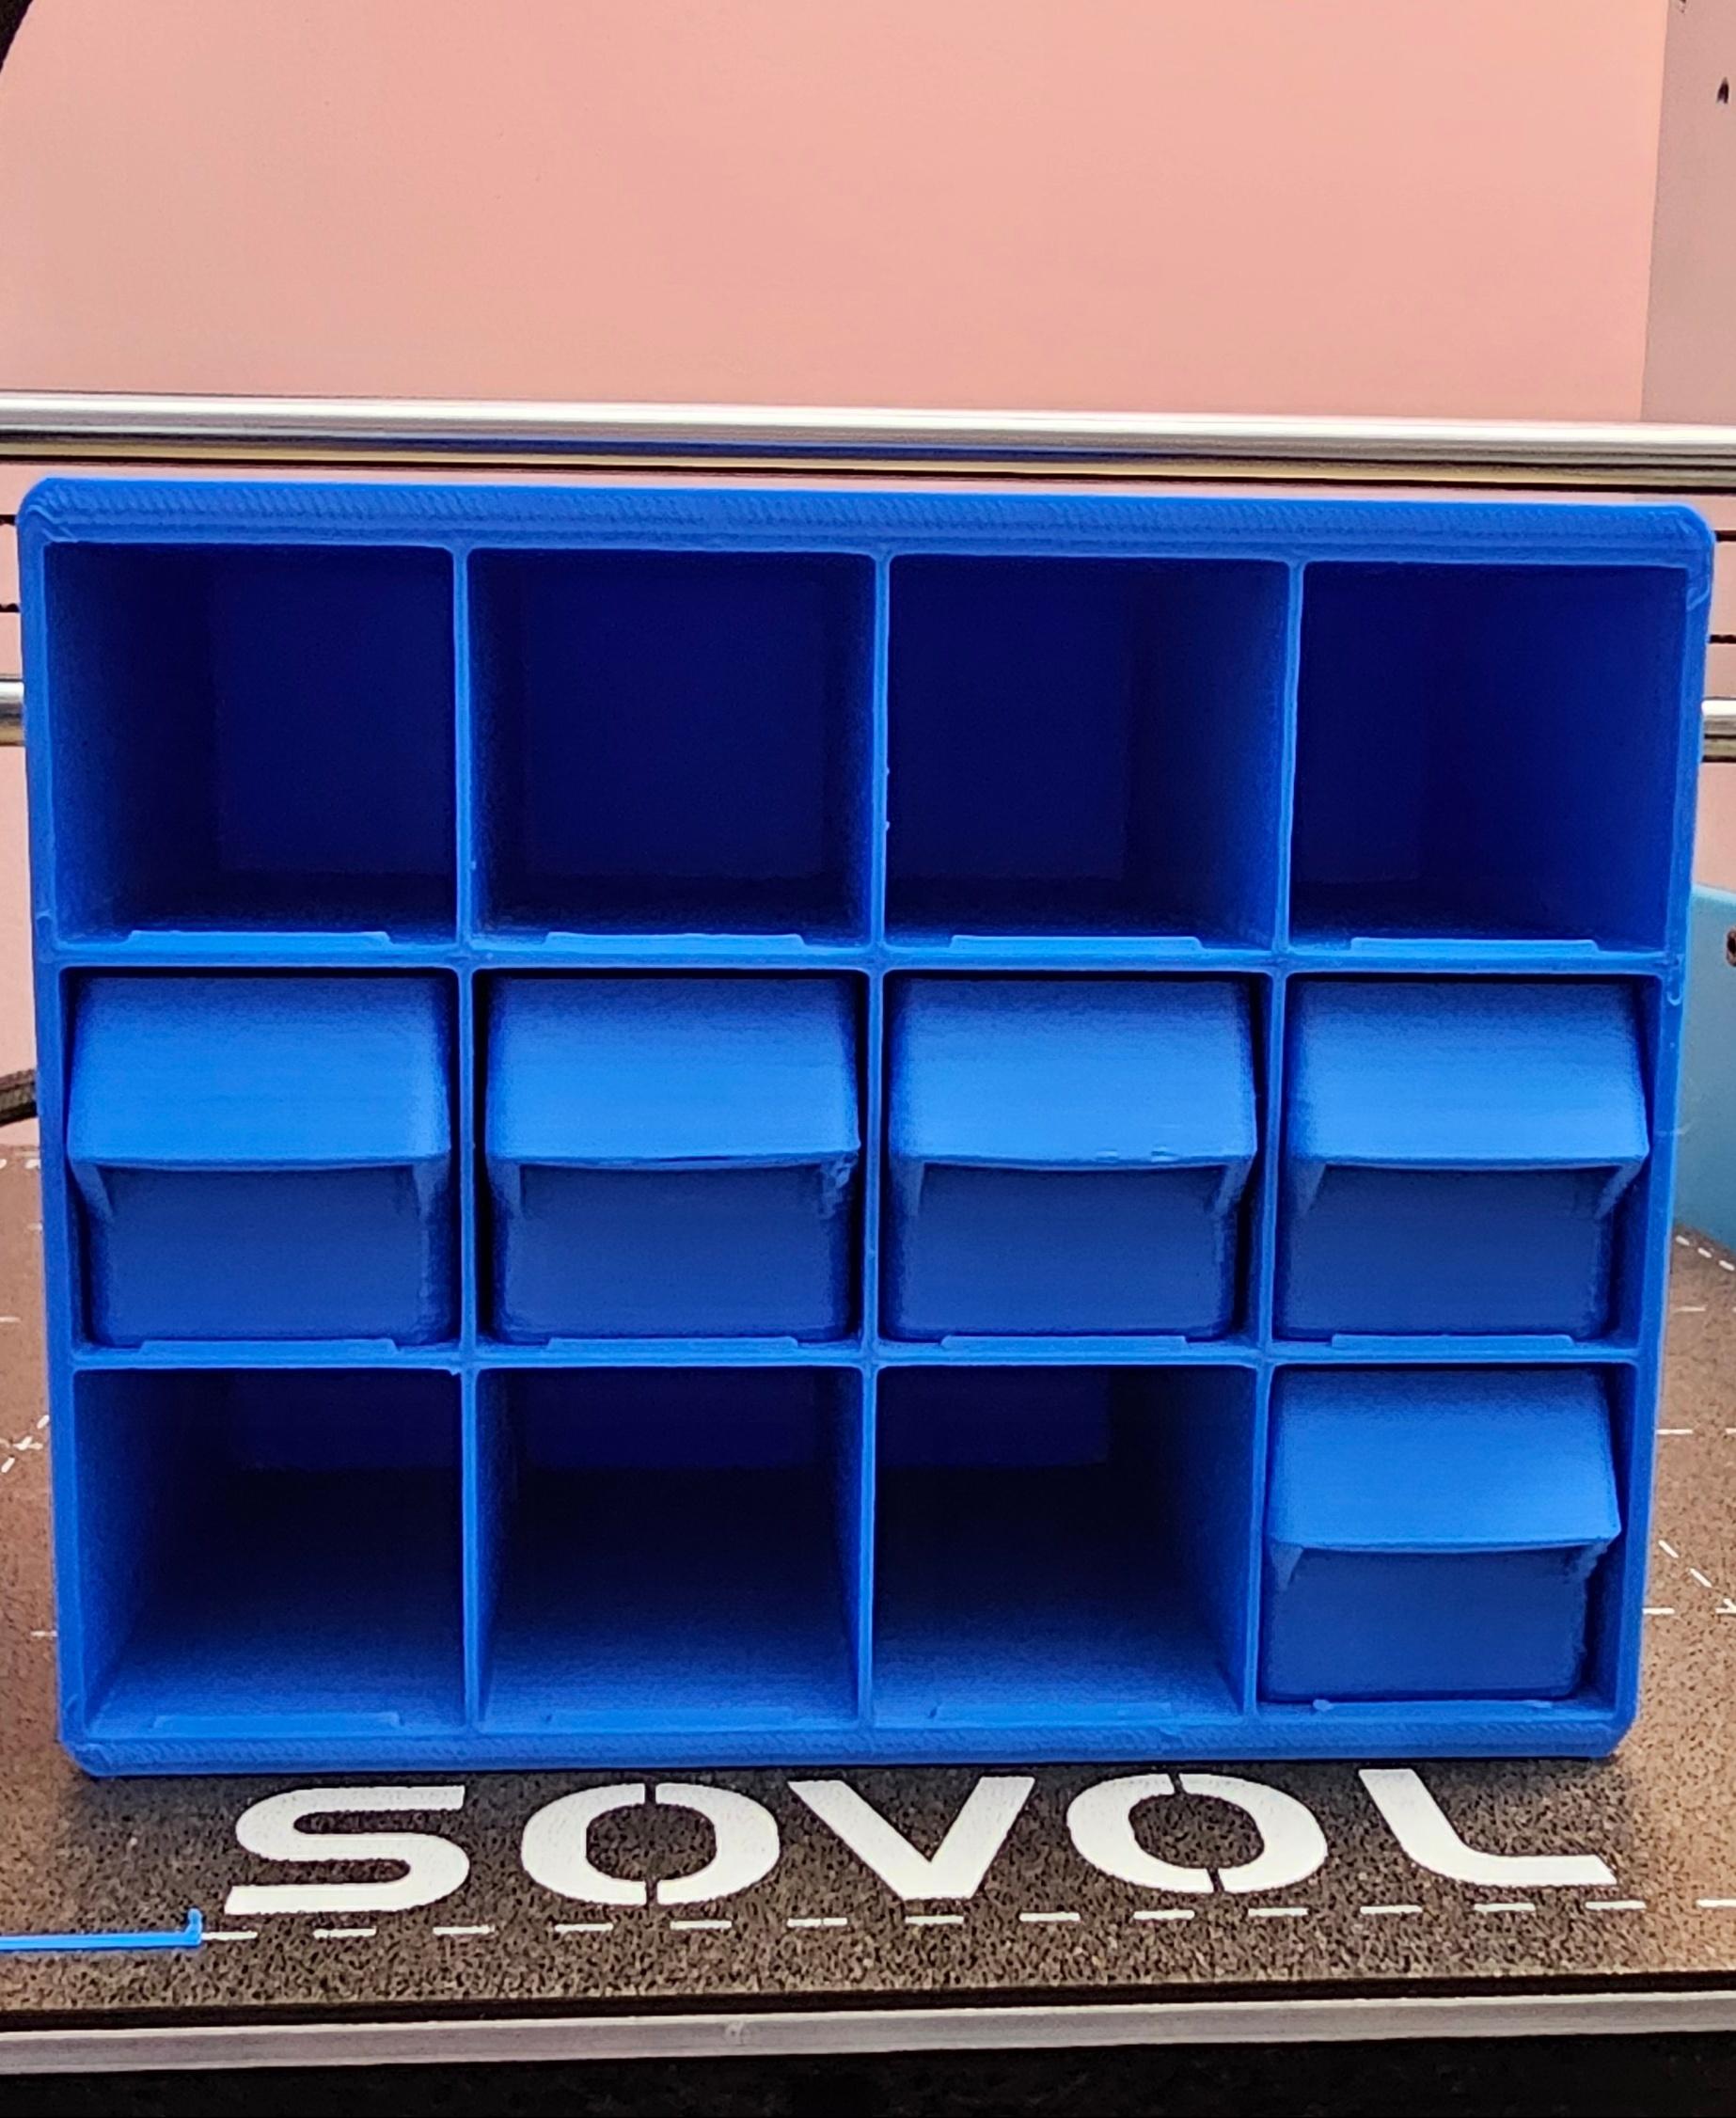 ScrewU-nit 3 NEW Sizes - Printed on a Sovol SV06 Plus. 
As noted in the comments, I've got some dimensional accuracy issues.
Middle row has normal drawers, top & bottom rows need 29mm tall drawers to clear the stopper.  - 3d model